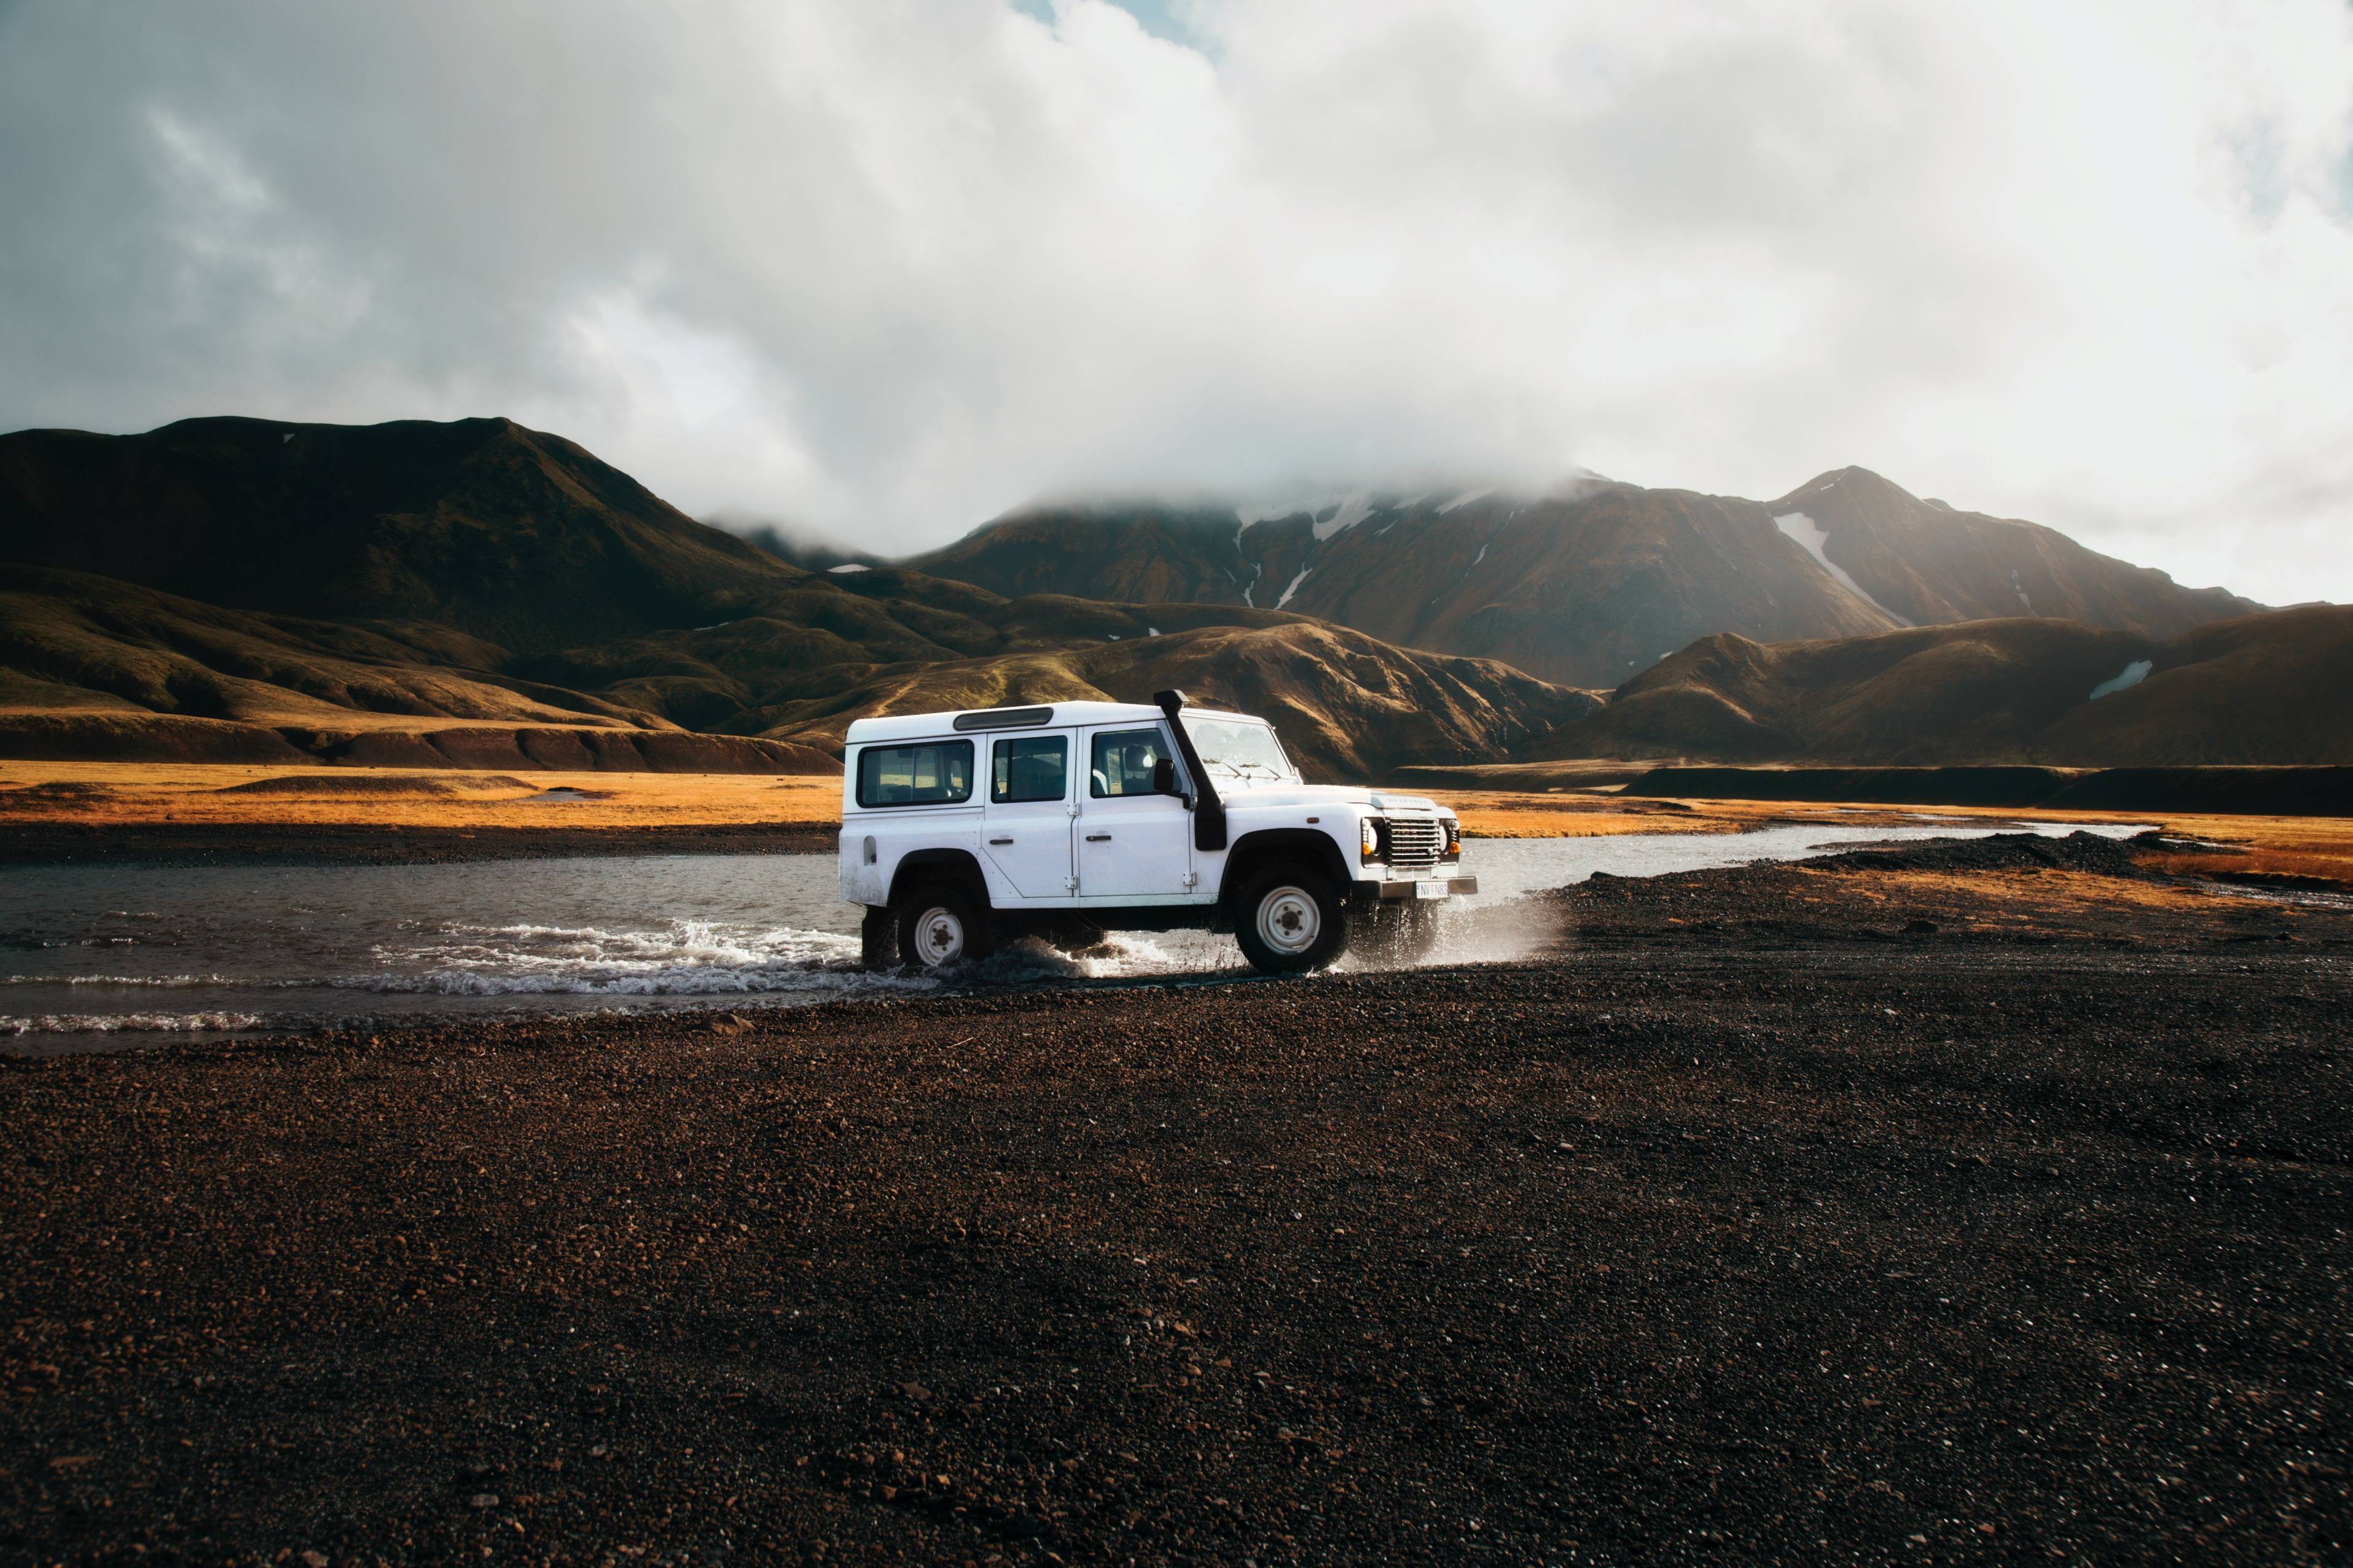 Driving a Super Jeep in Iceland